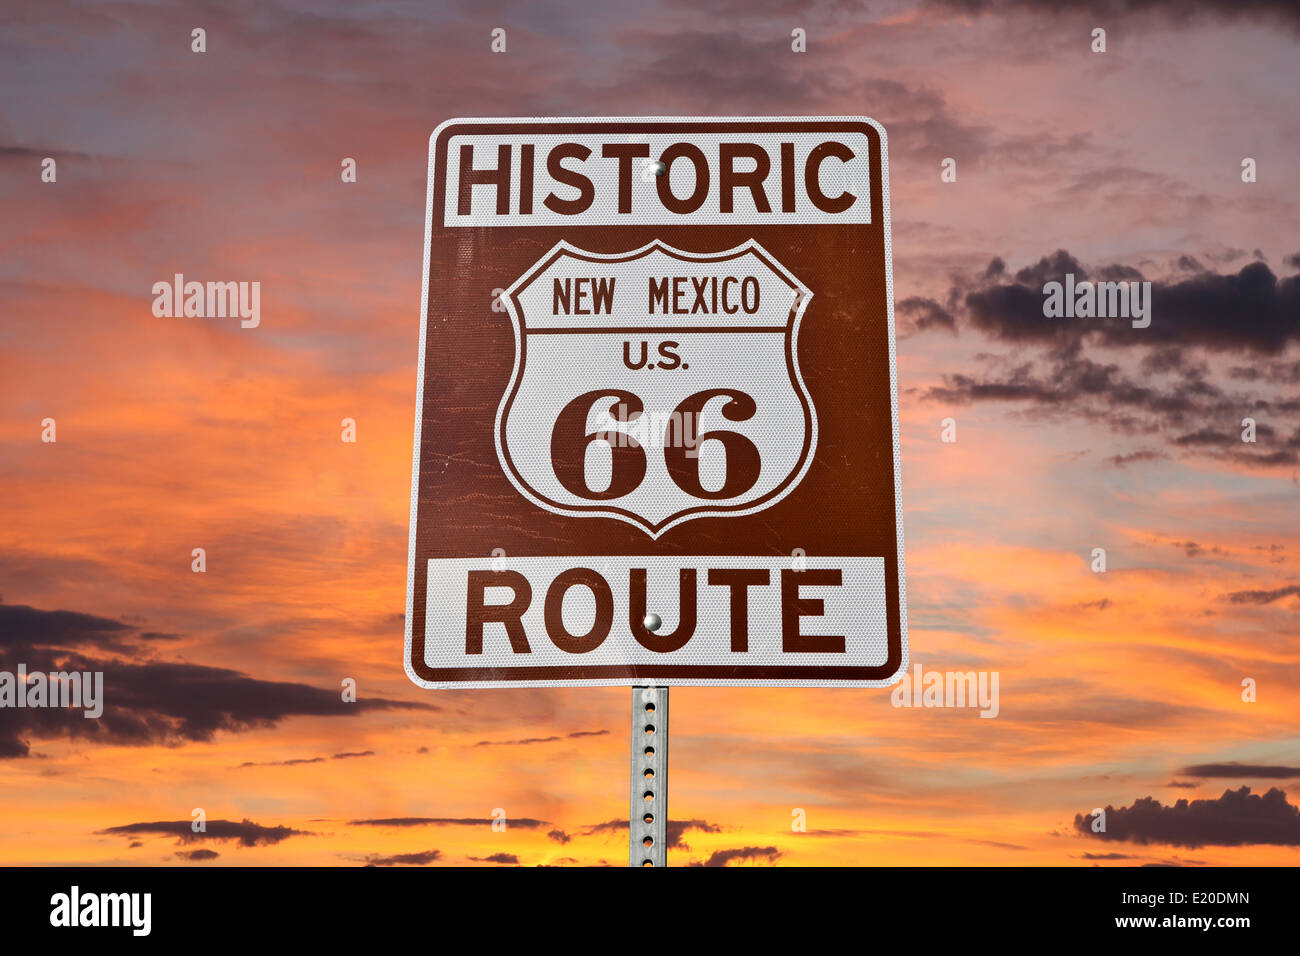 Historic Route 66 New Mexico sign with sunset sky. Stock Photo